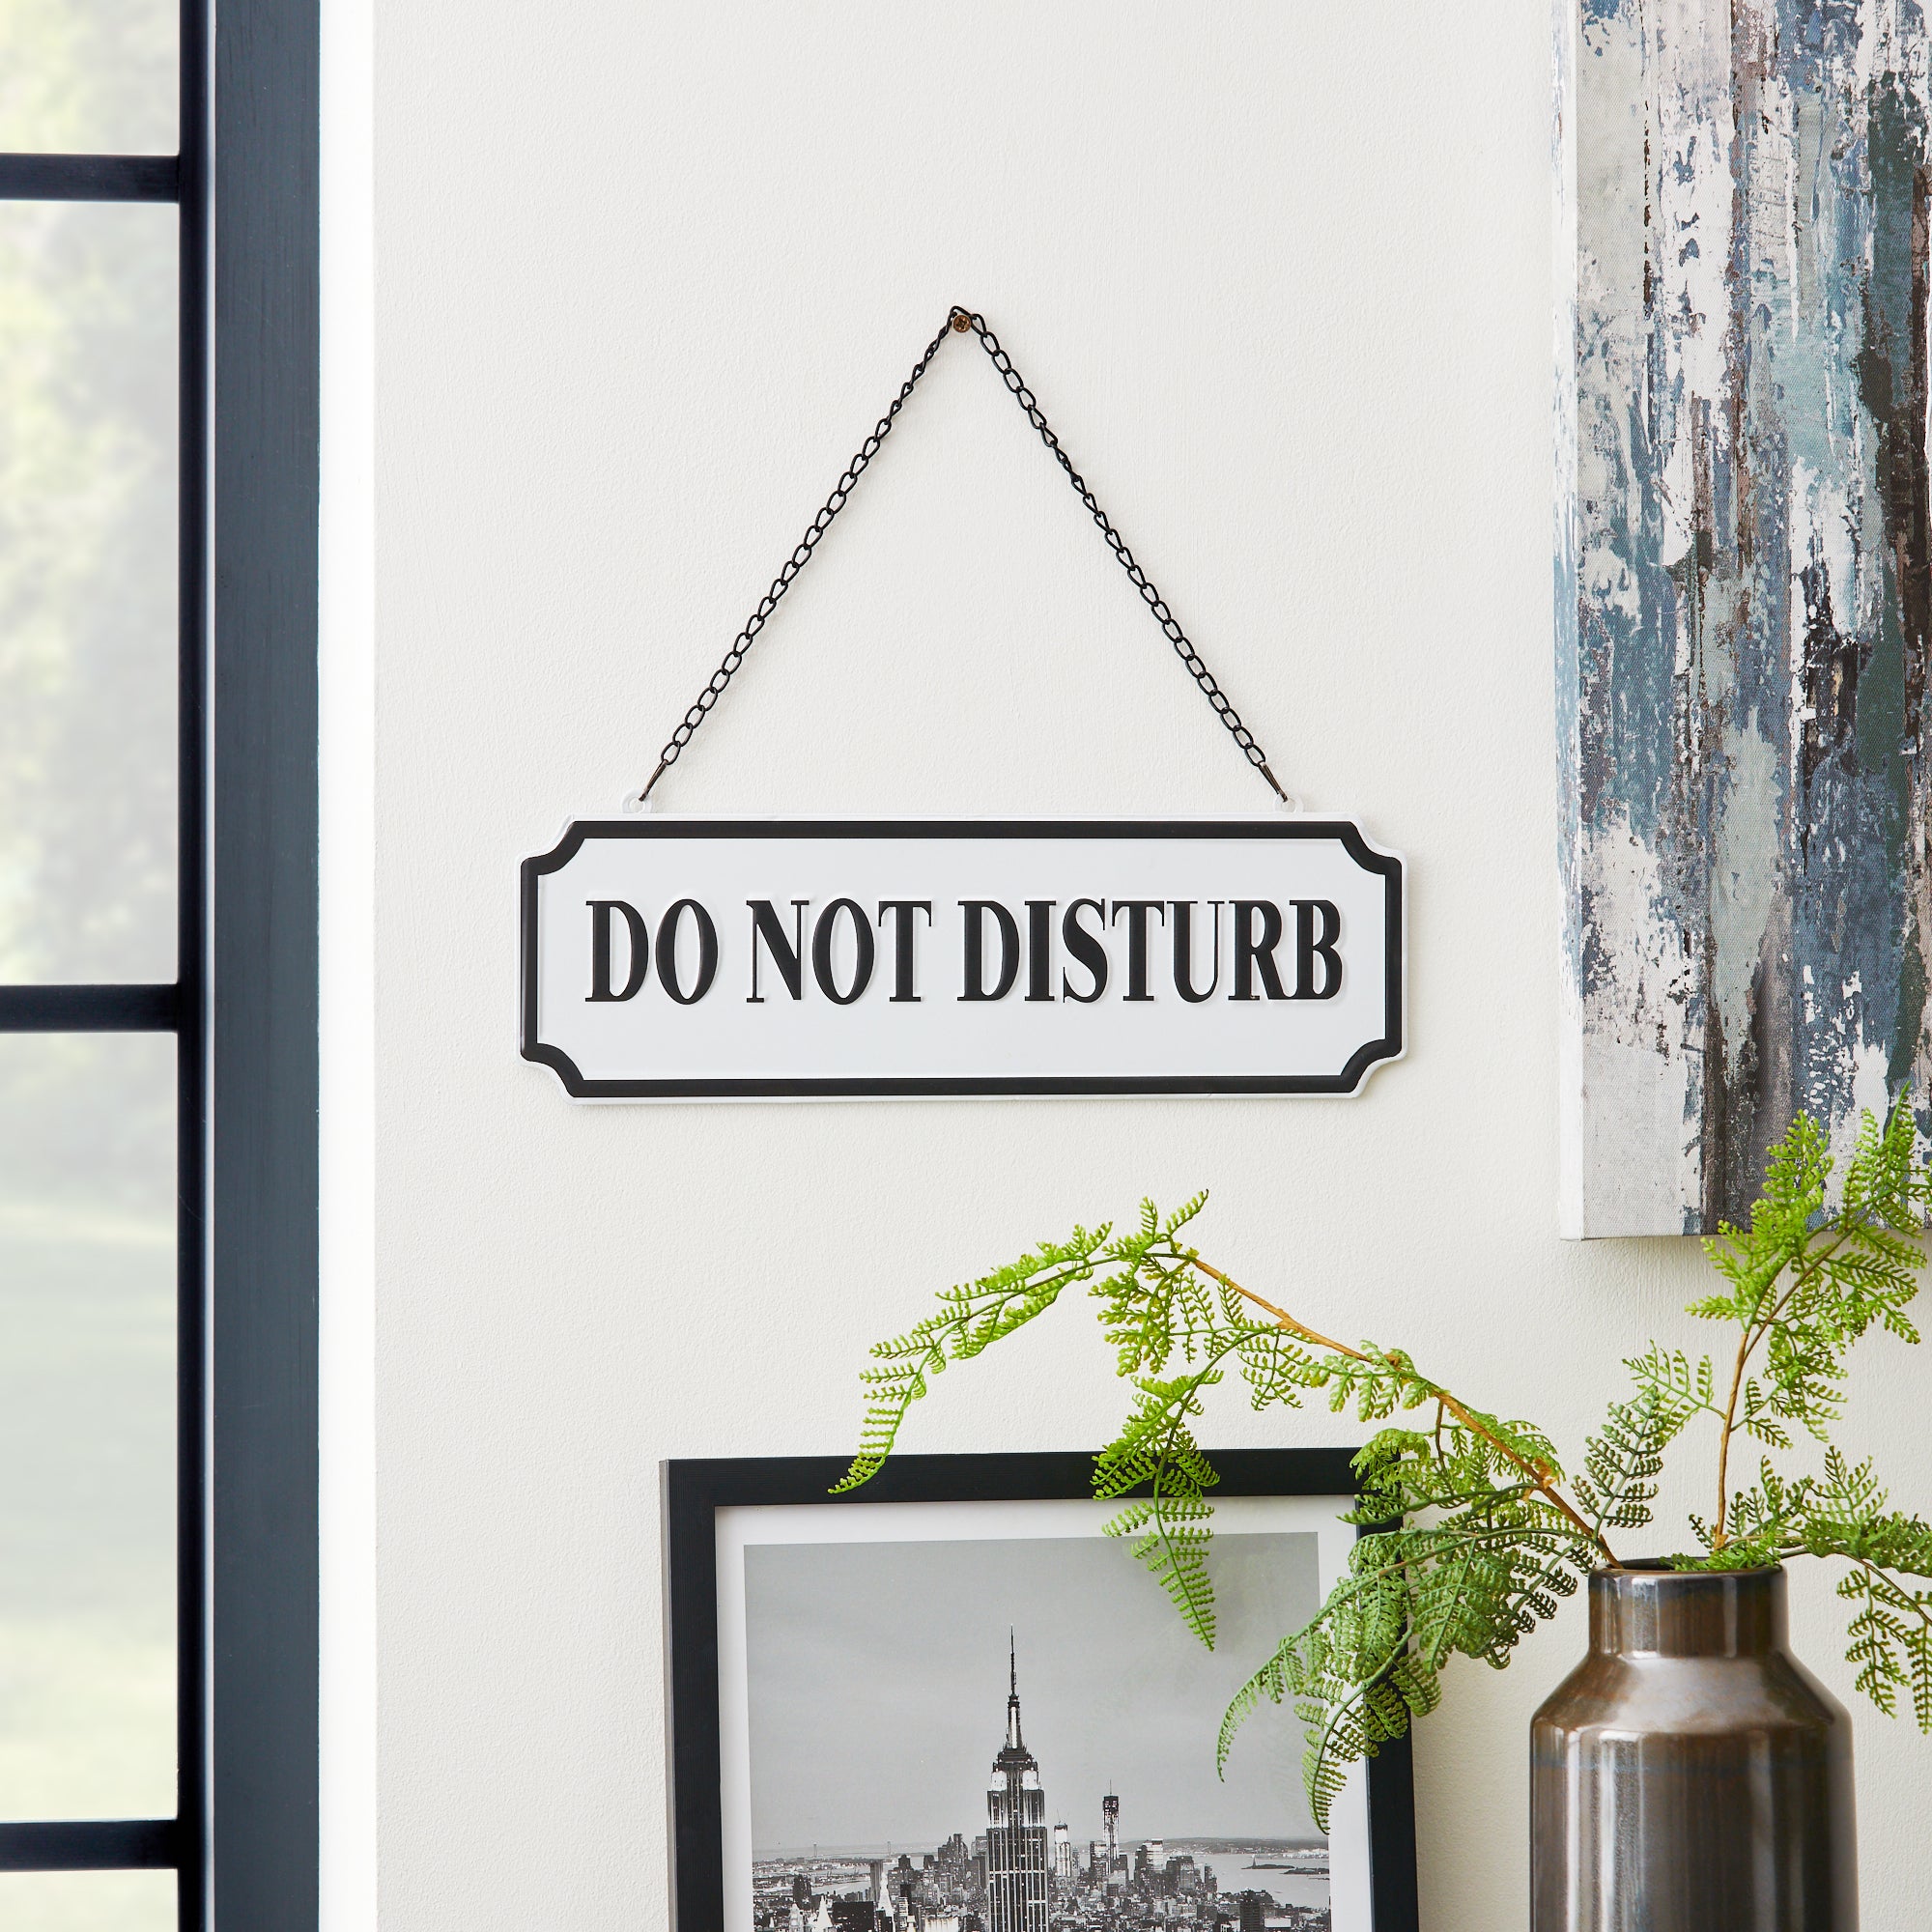 Smart Industrial Dual Sided Hanging Sign